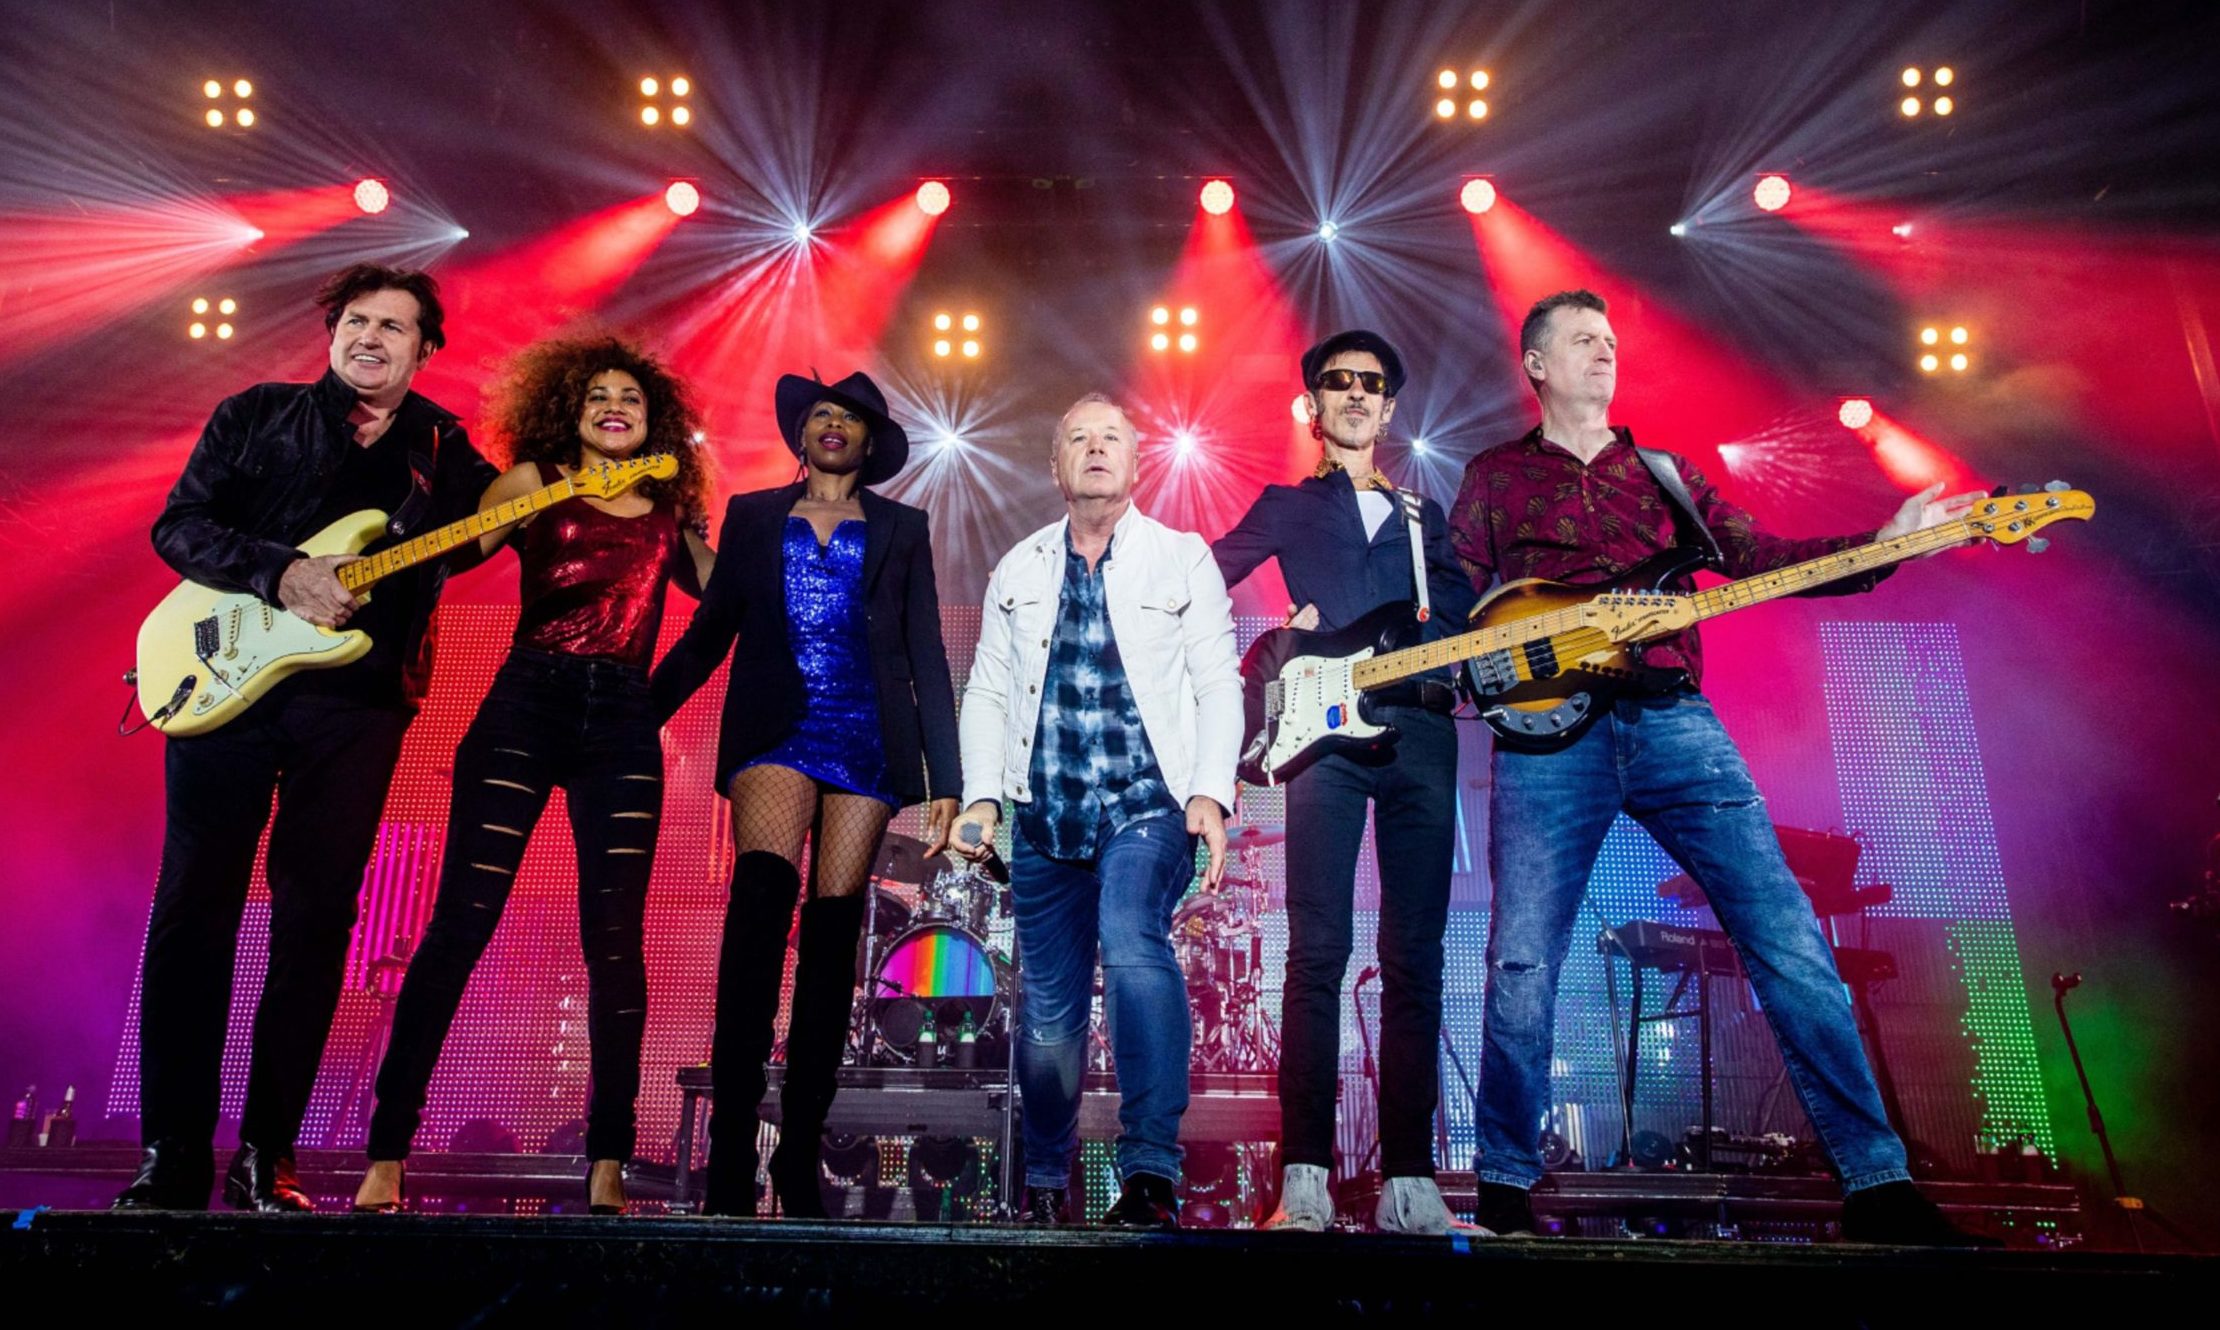 Simple Minds will perform at P&J live